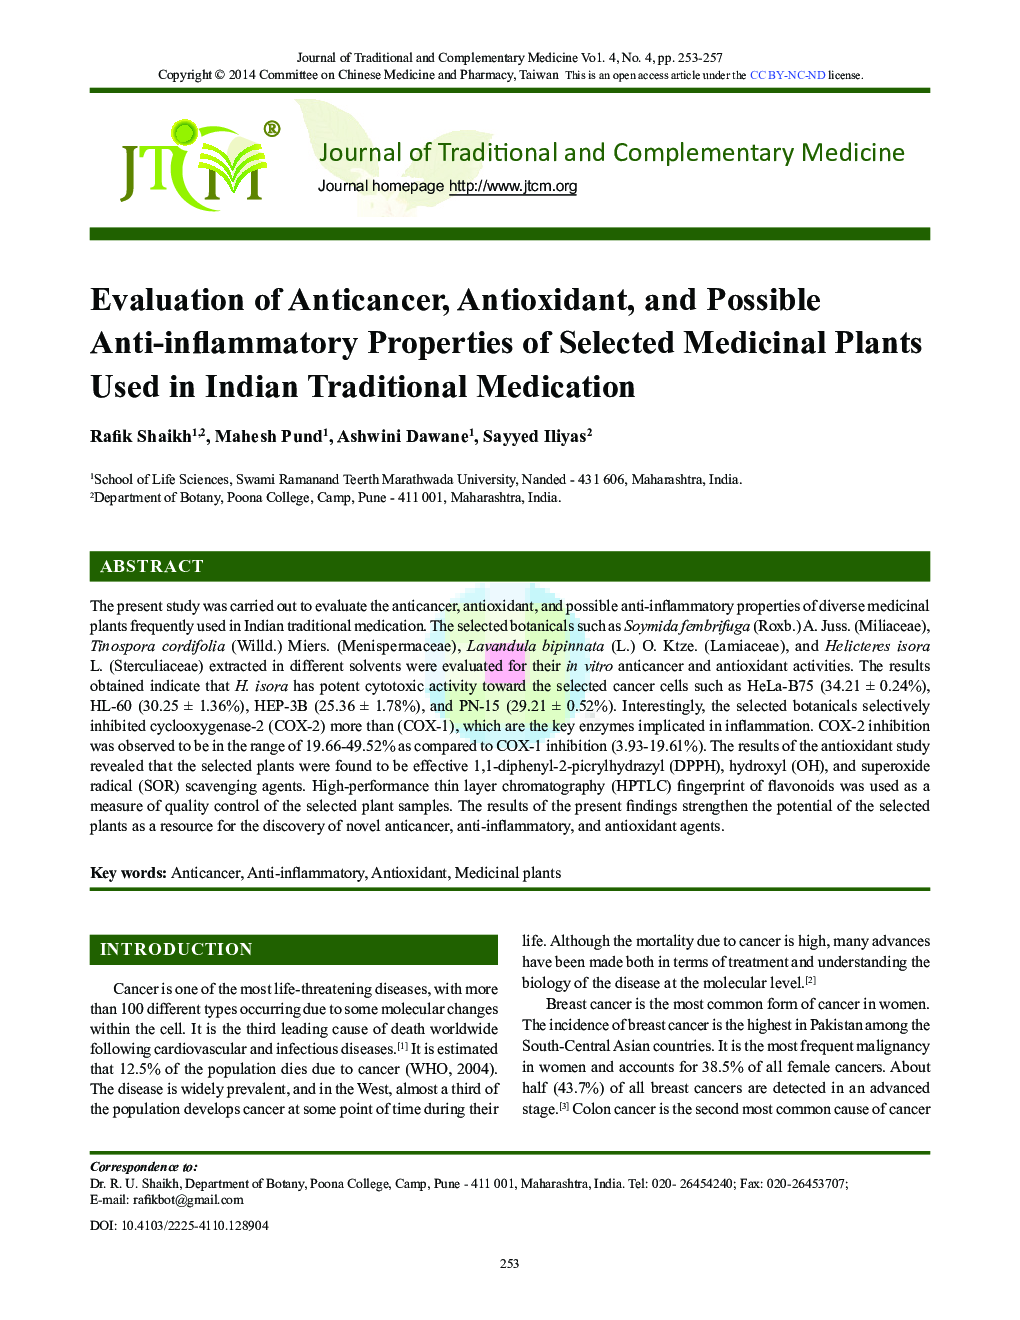 Evaluation of Anticancer, Antioxidant, and Possible Anti-inflammatory Properties of Selected Medicinal Plants Used in Indian Traditional Medication